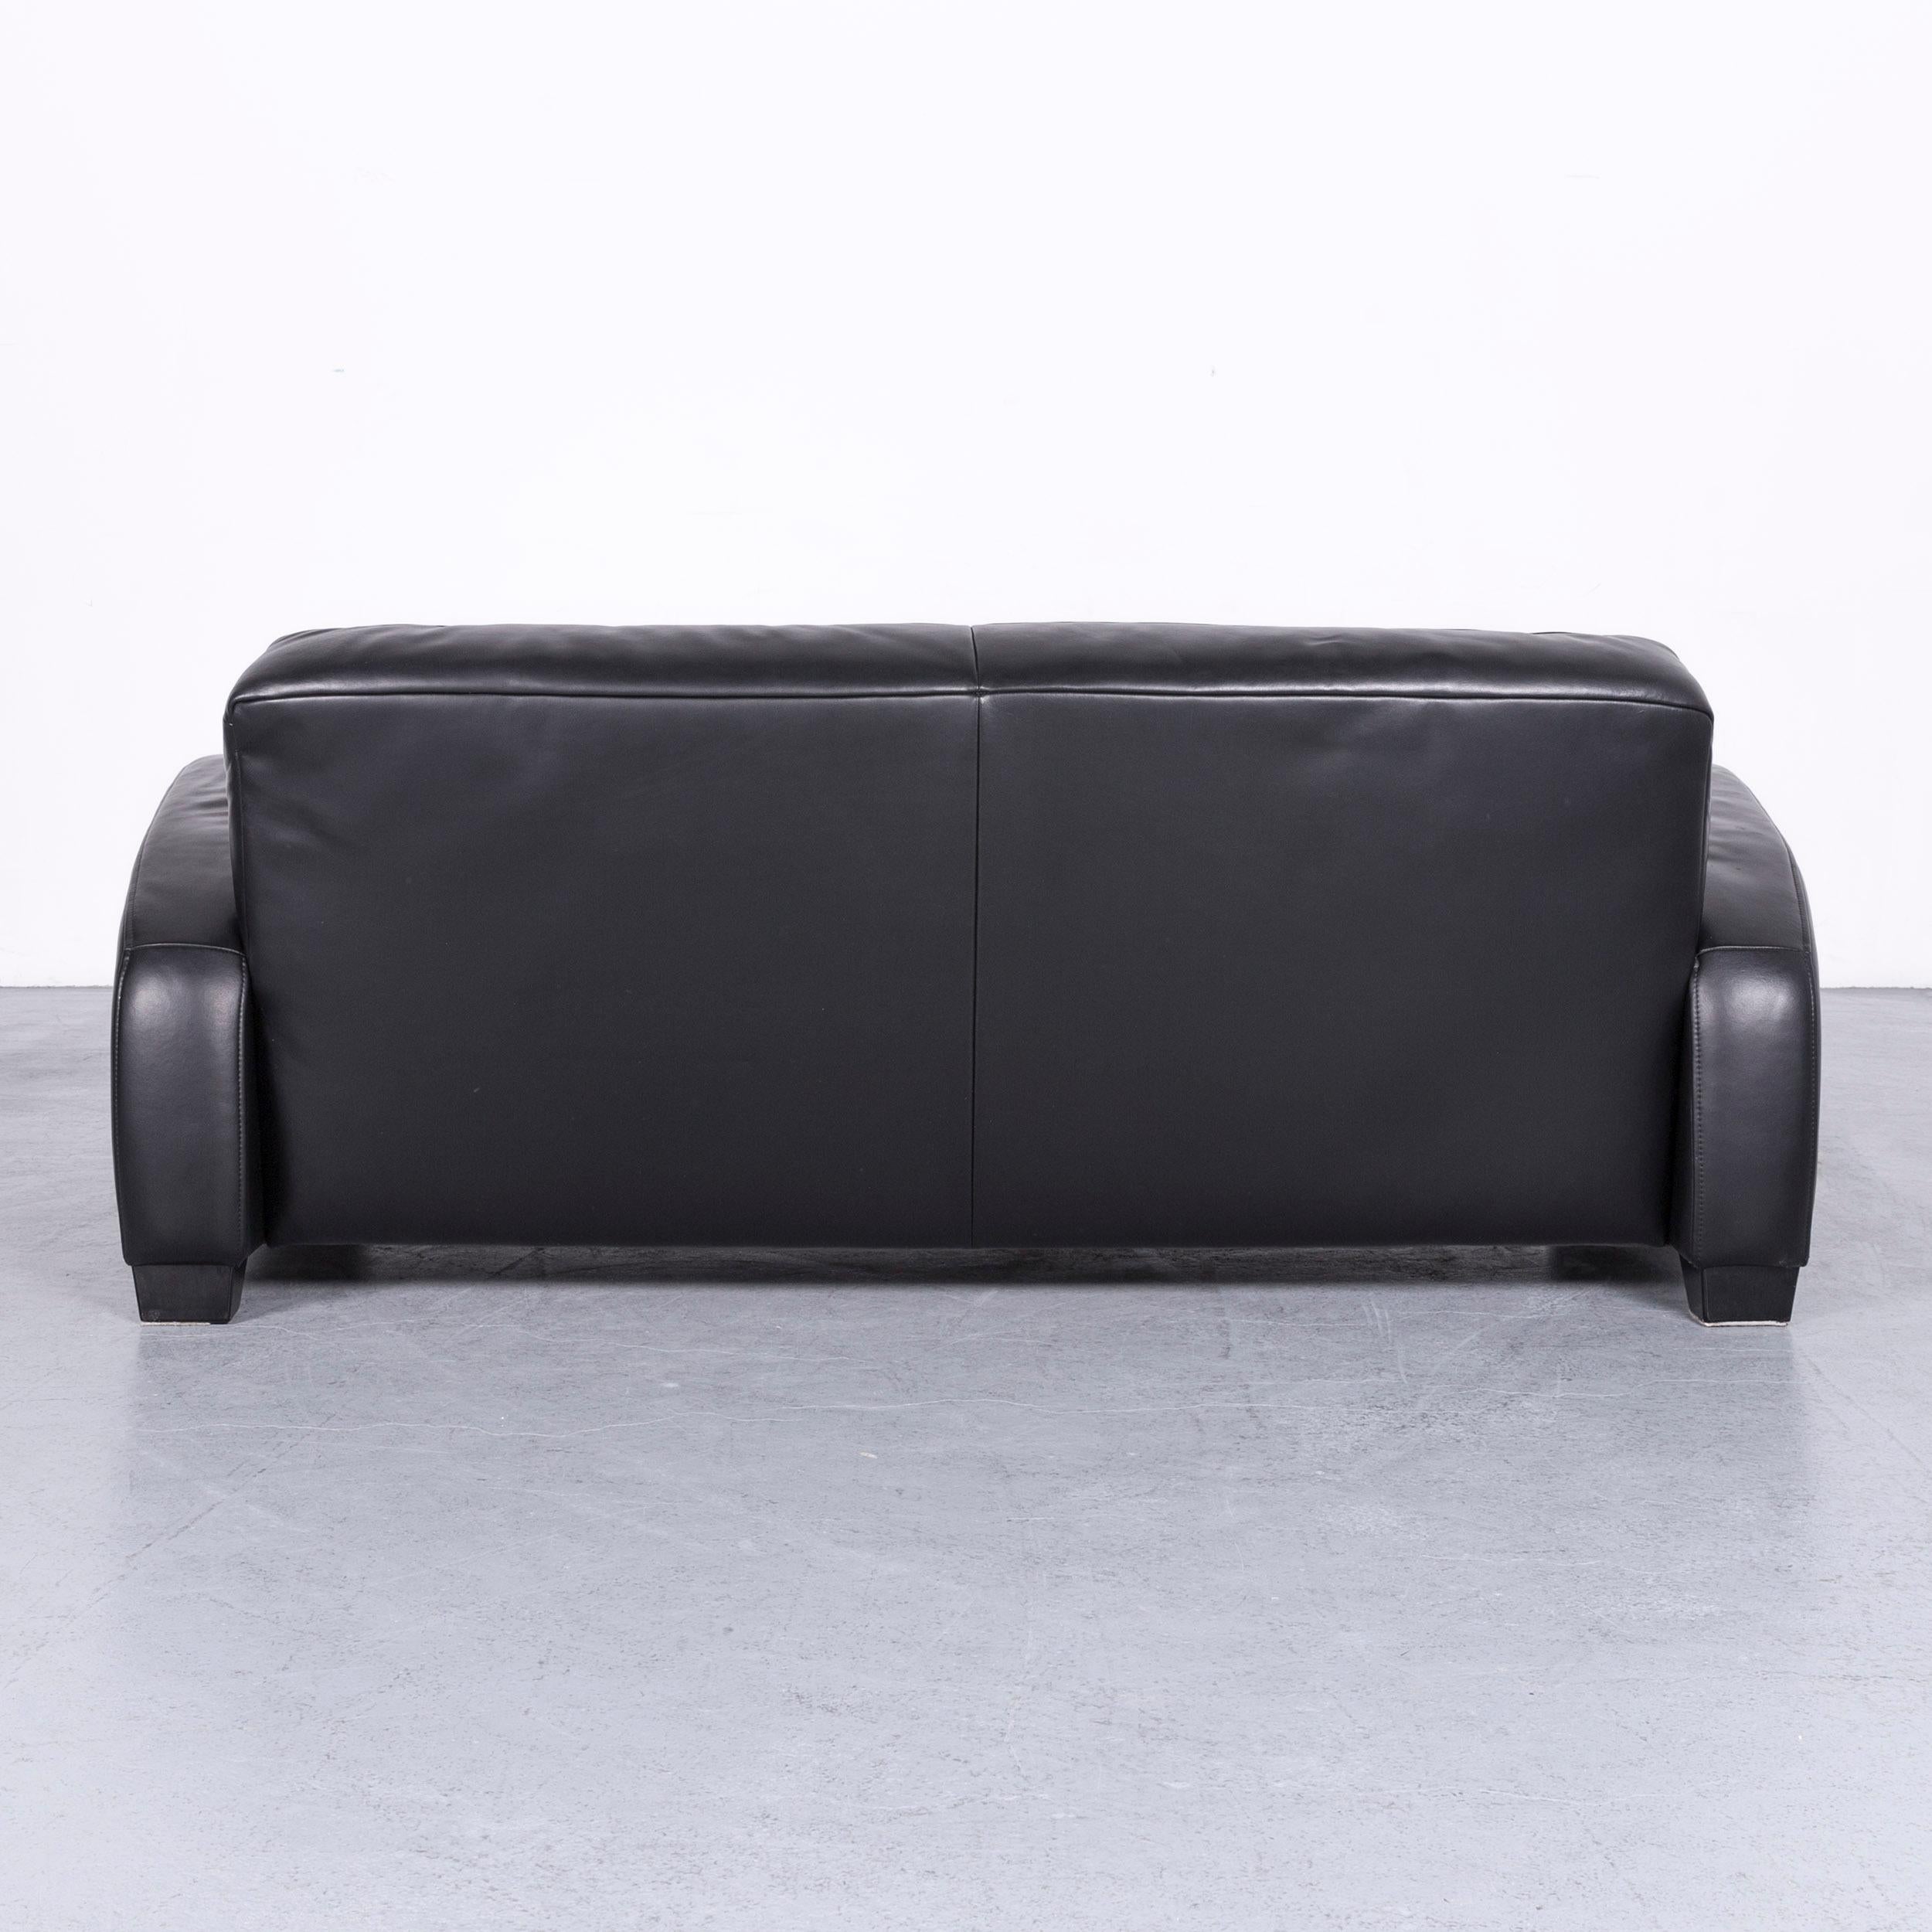 Koinor Designer Leather Sofa Black Two-Seat Couch 4